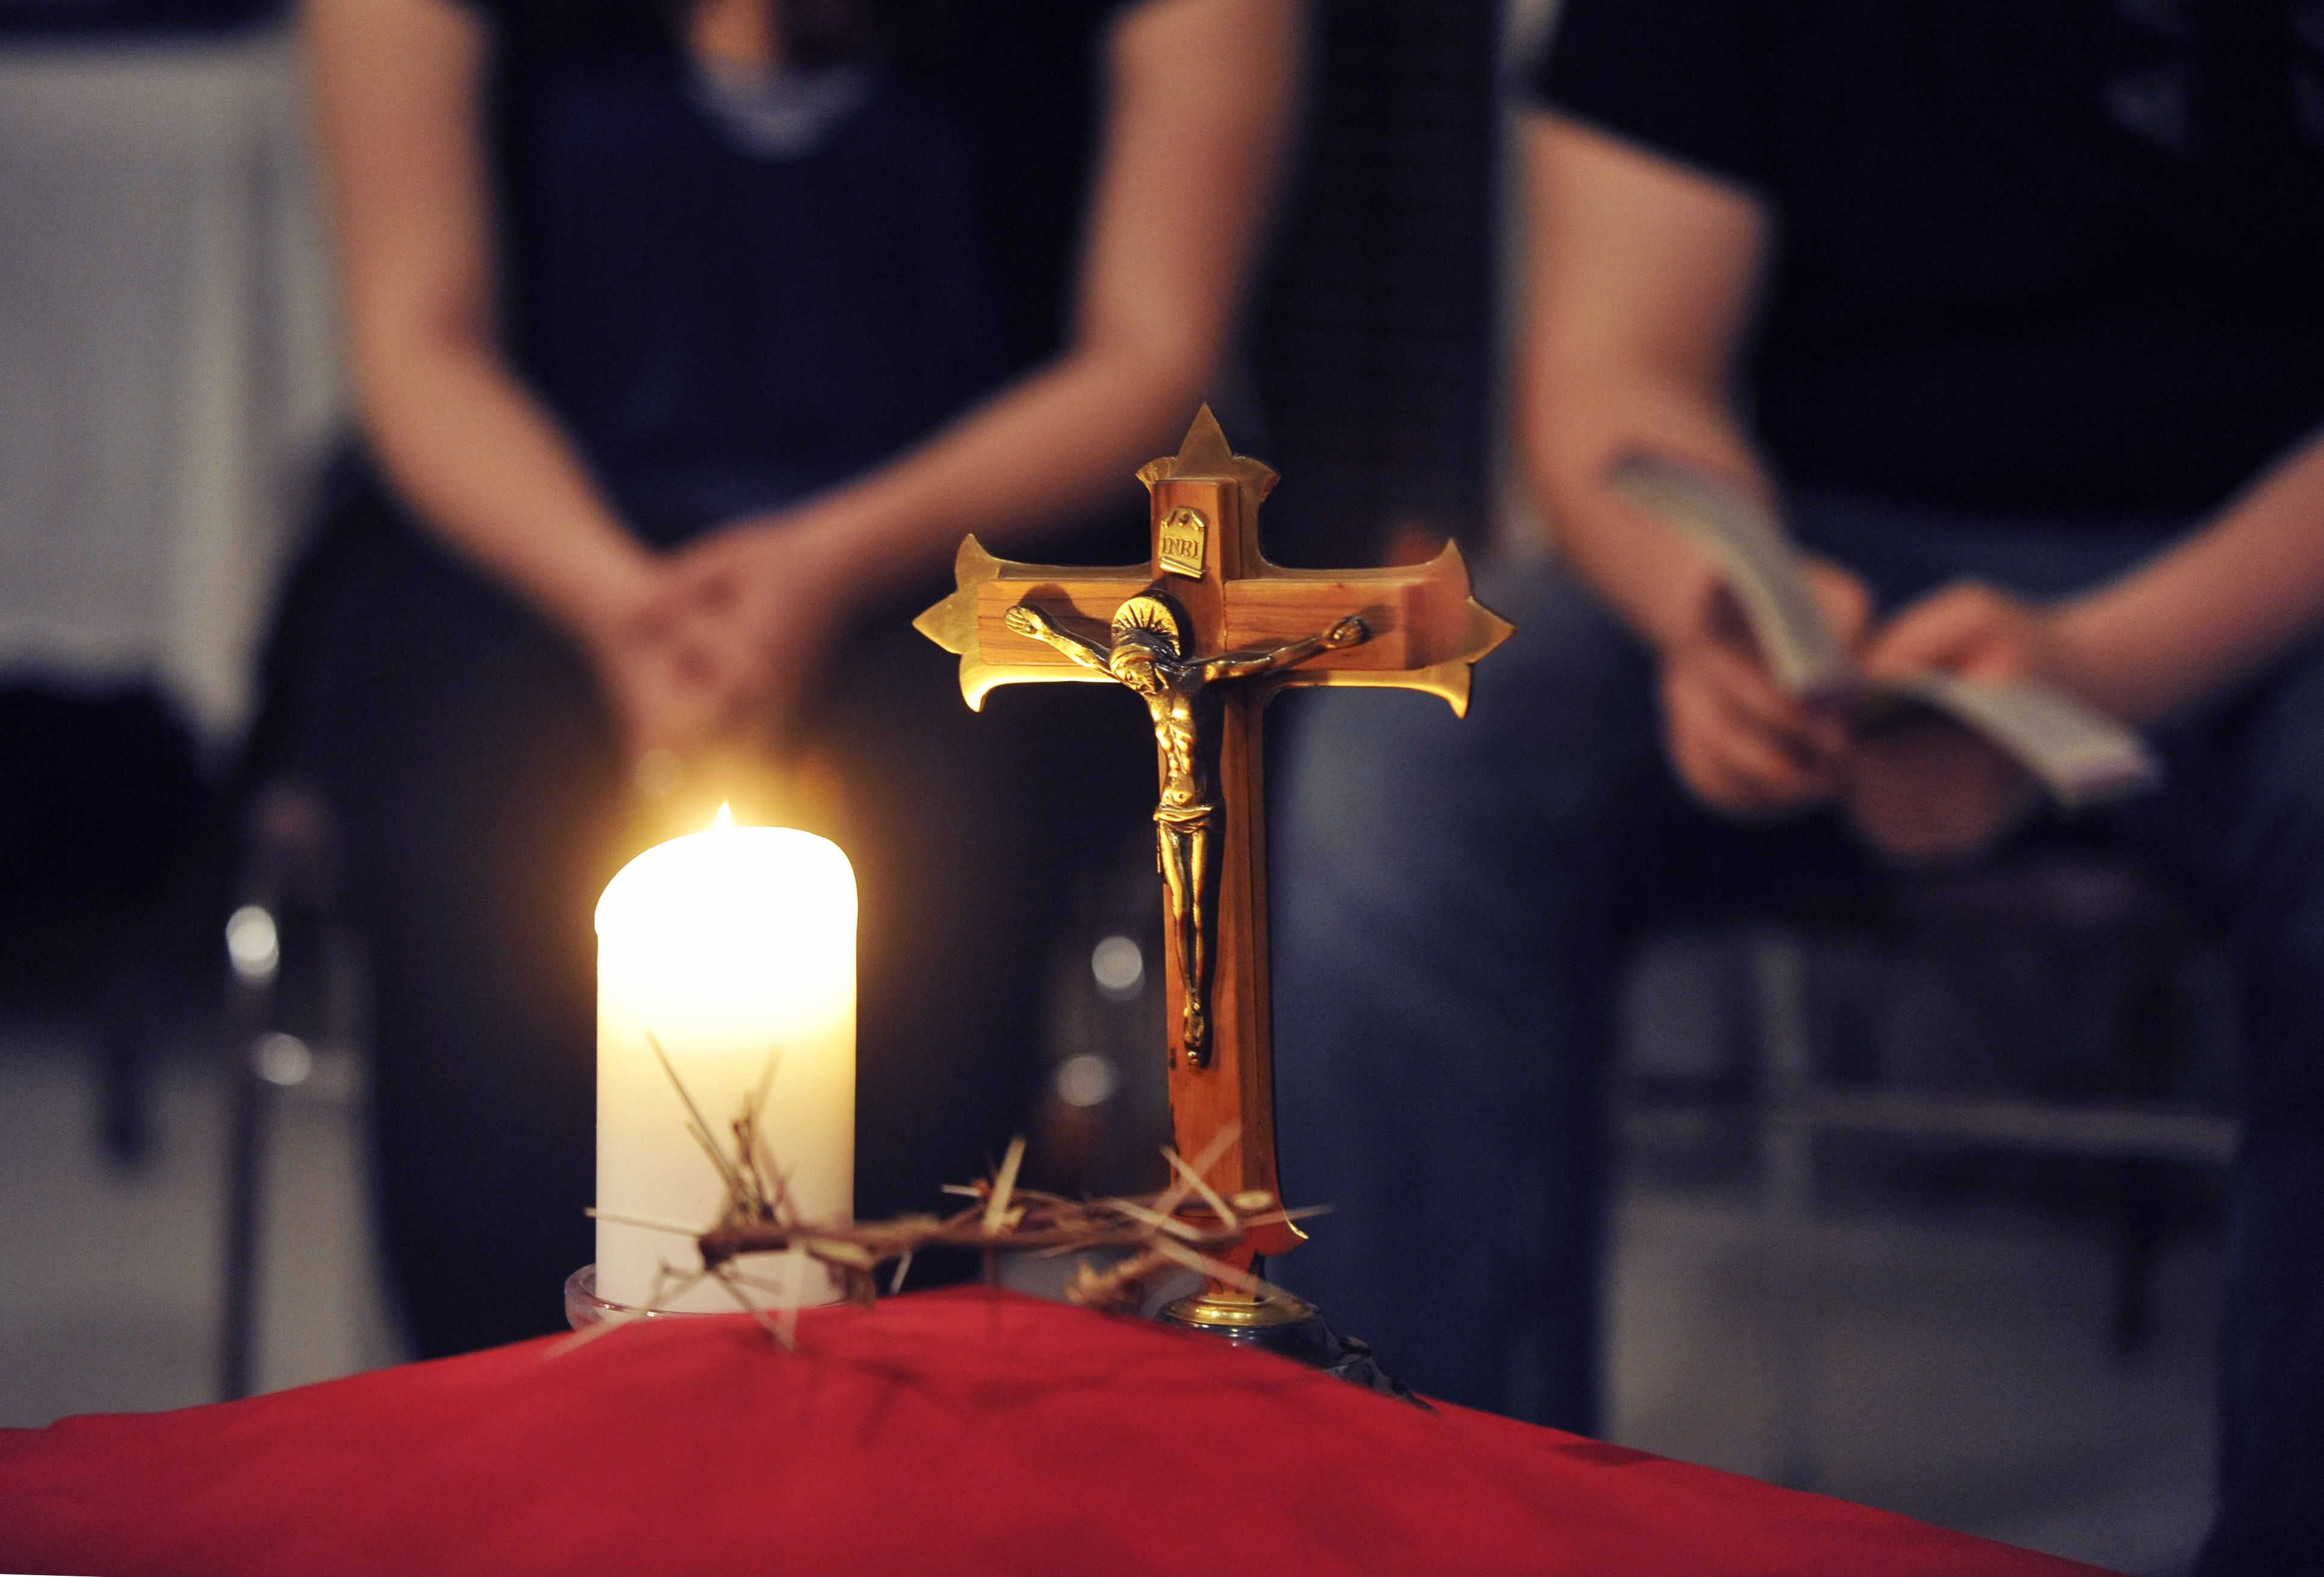 Praying hands by candle and cross